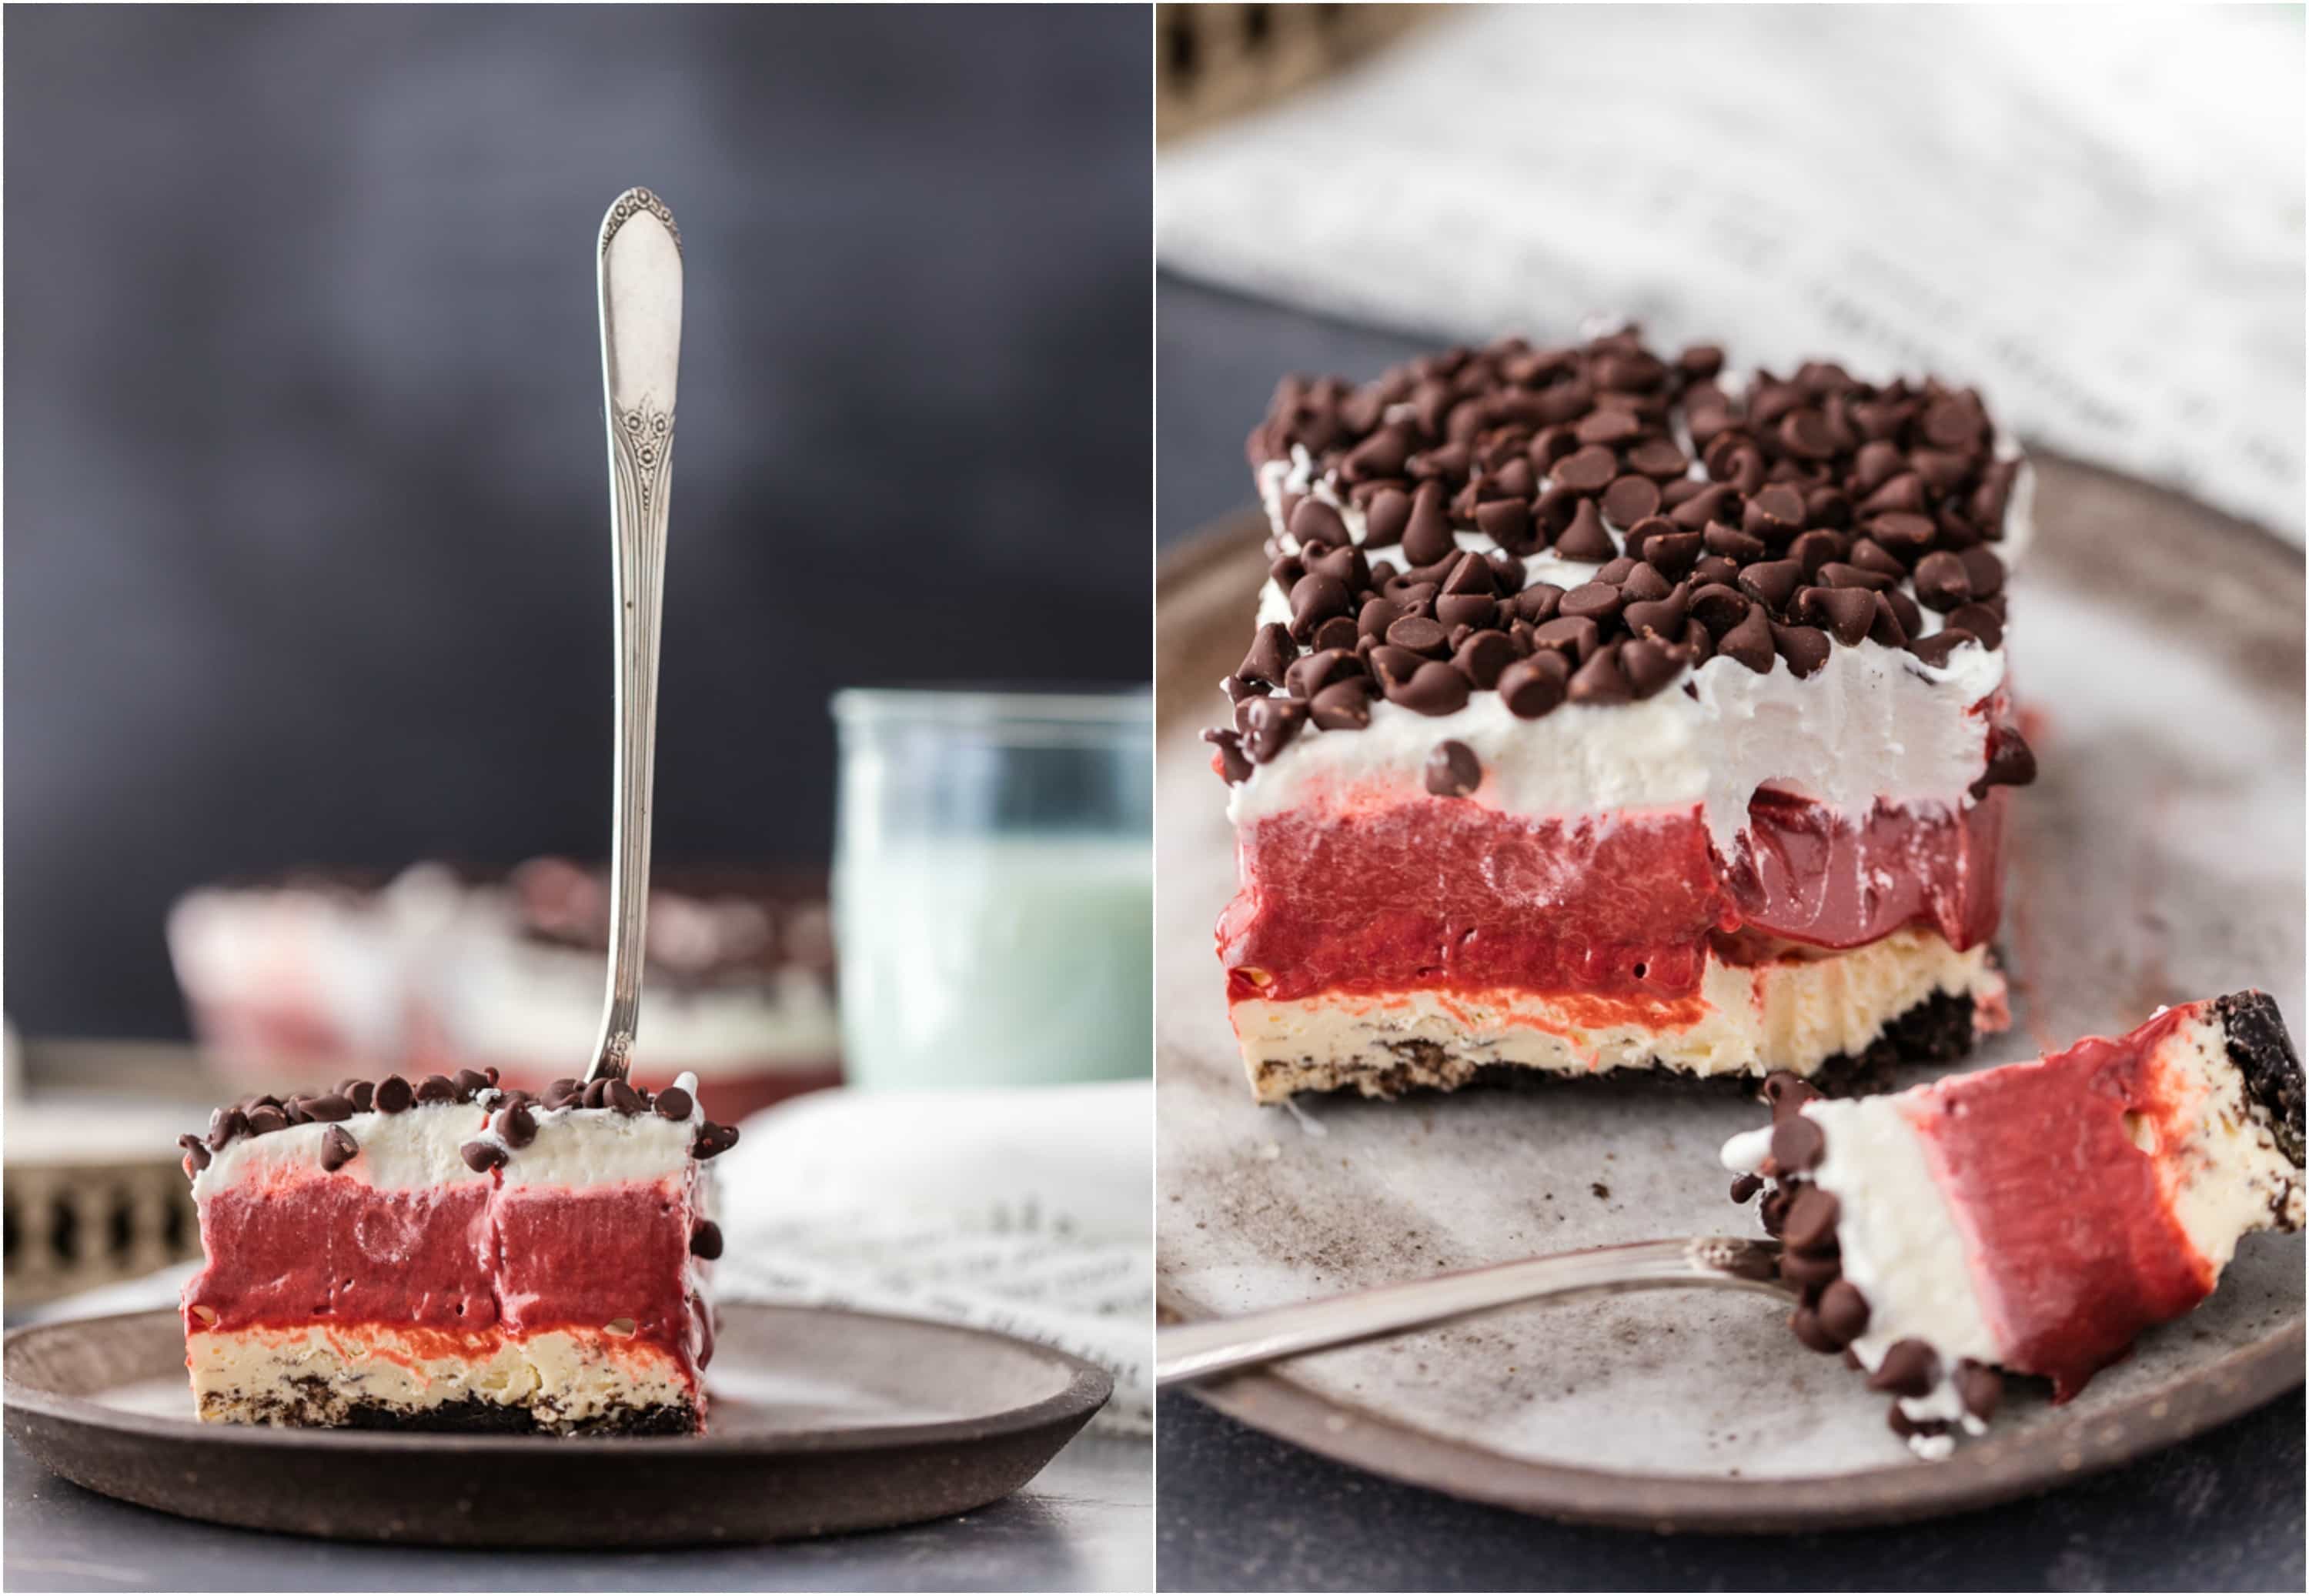 True love is Red Velvet Dessert Lasagna! Layers of cheesecake, chocolate pudding, and whipped cream make this perfect Valentine's Day dessert! Great for parties year round!